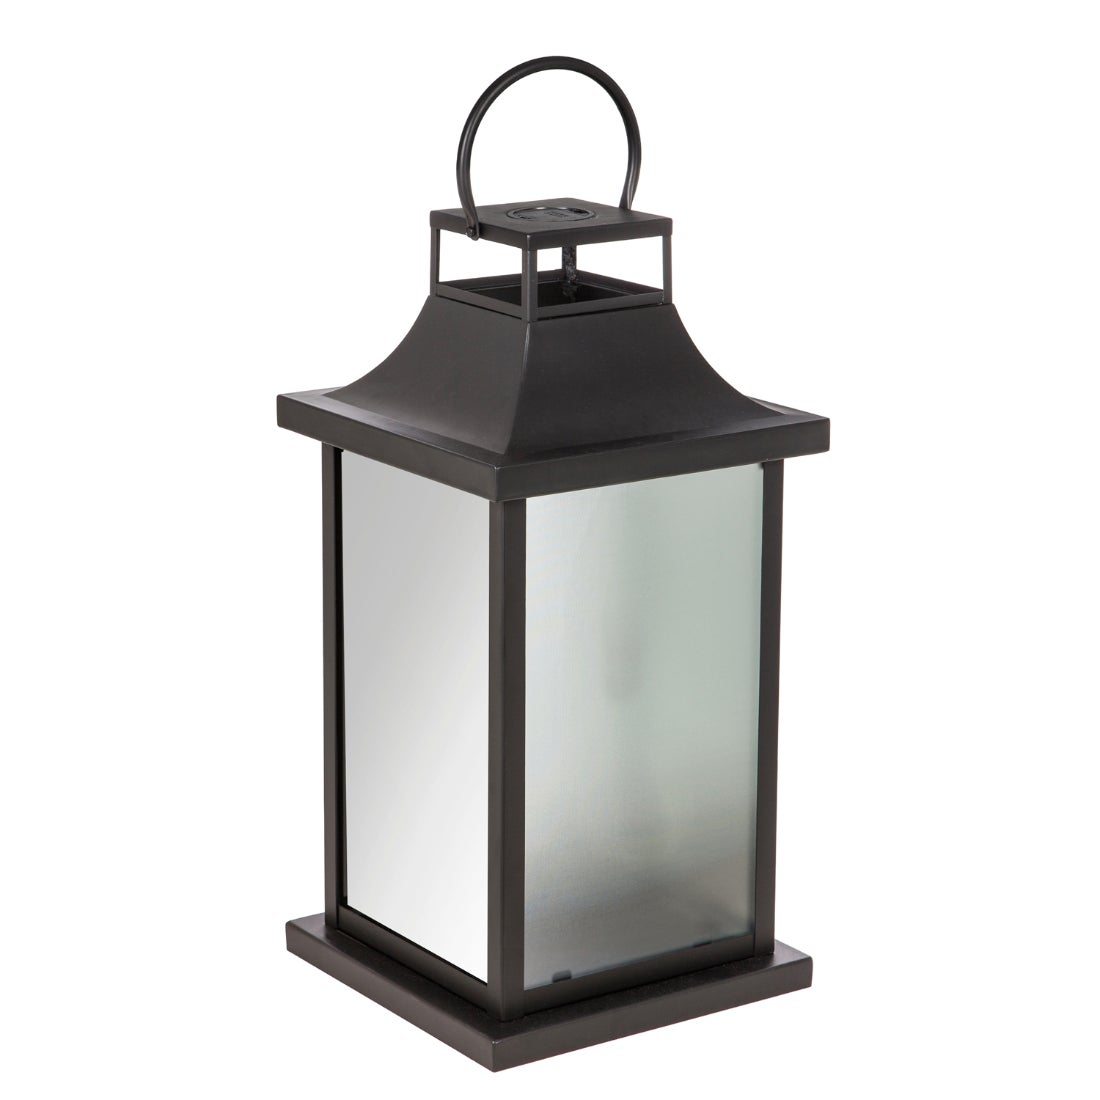 Oversized Glass and Metal Galaxy Lights Outdoor Lantern